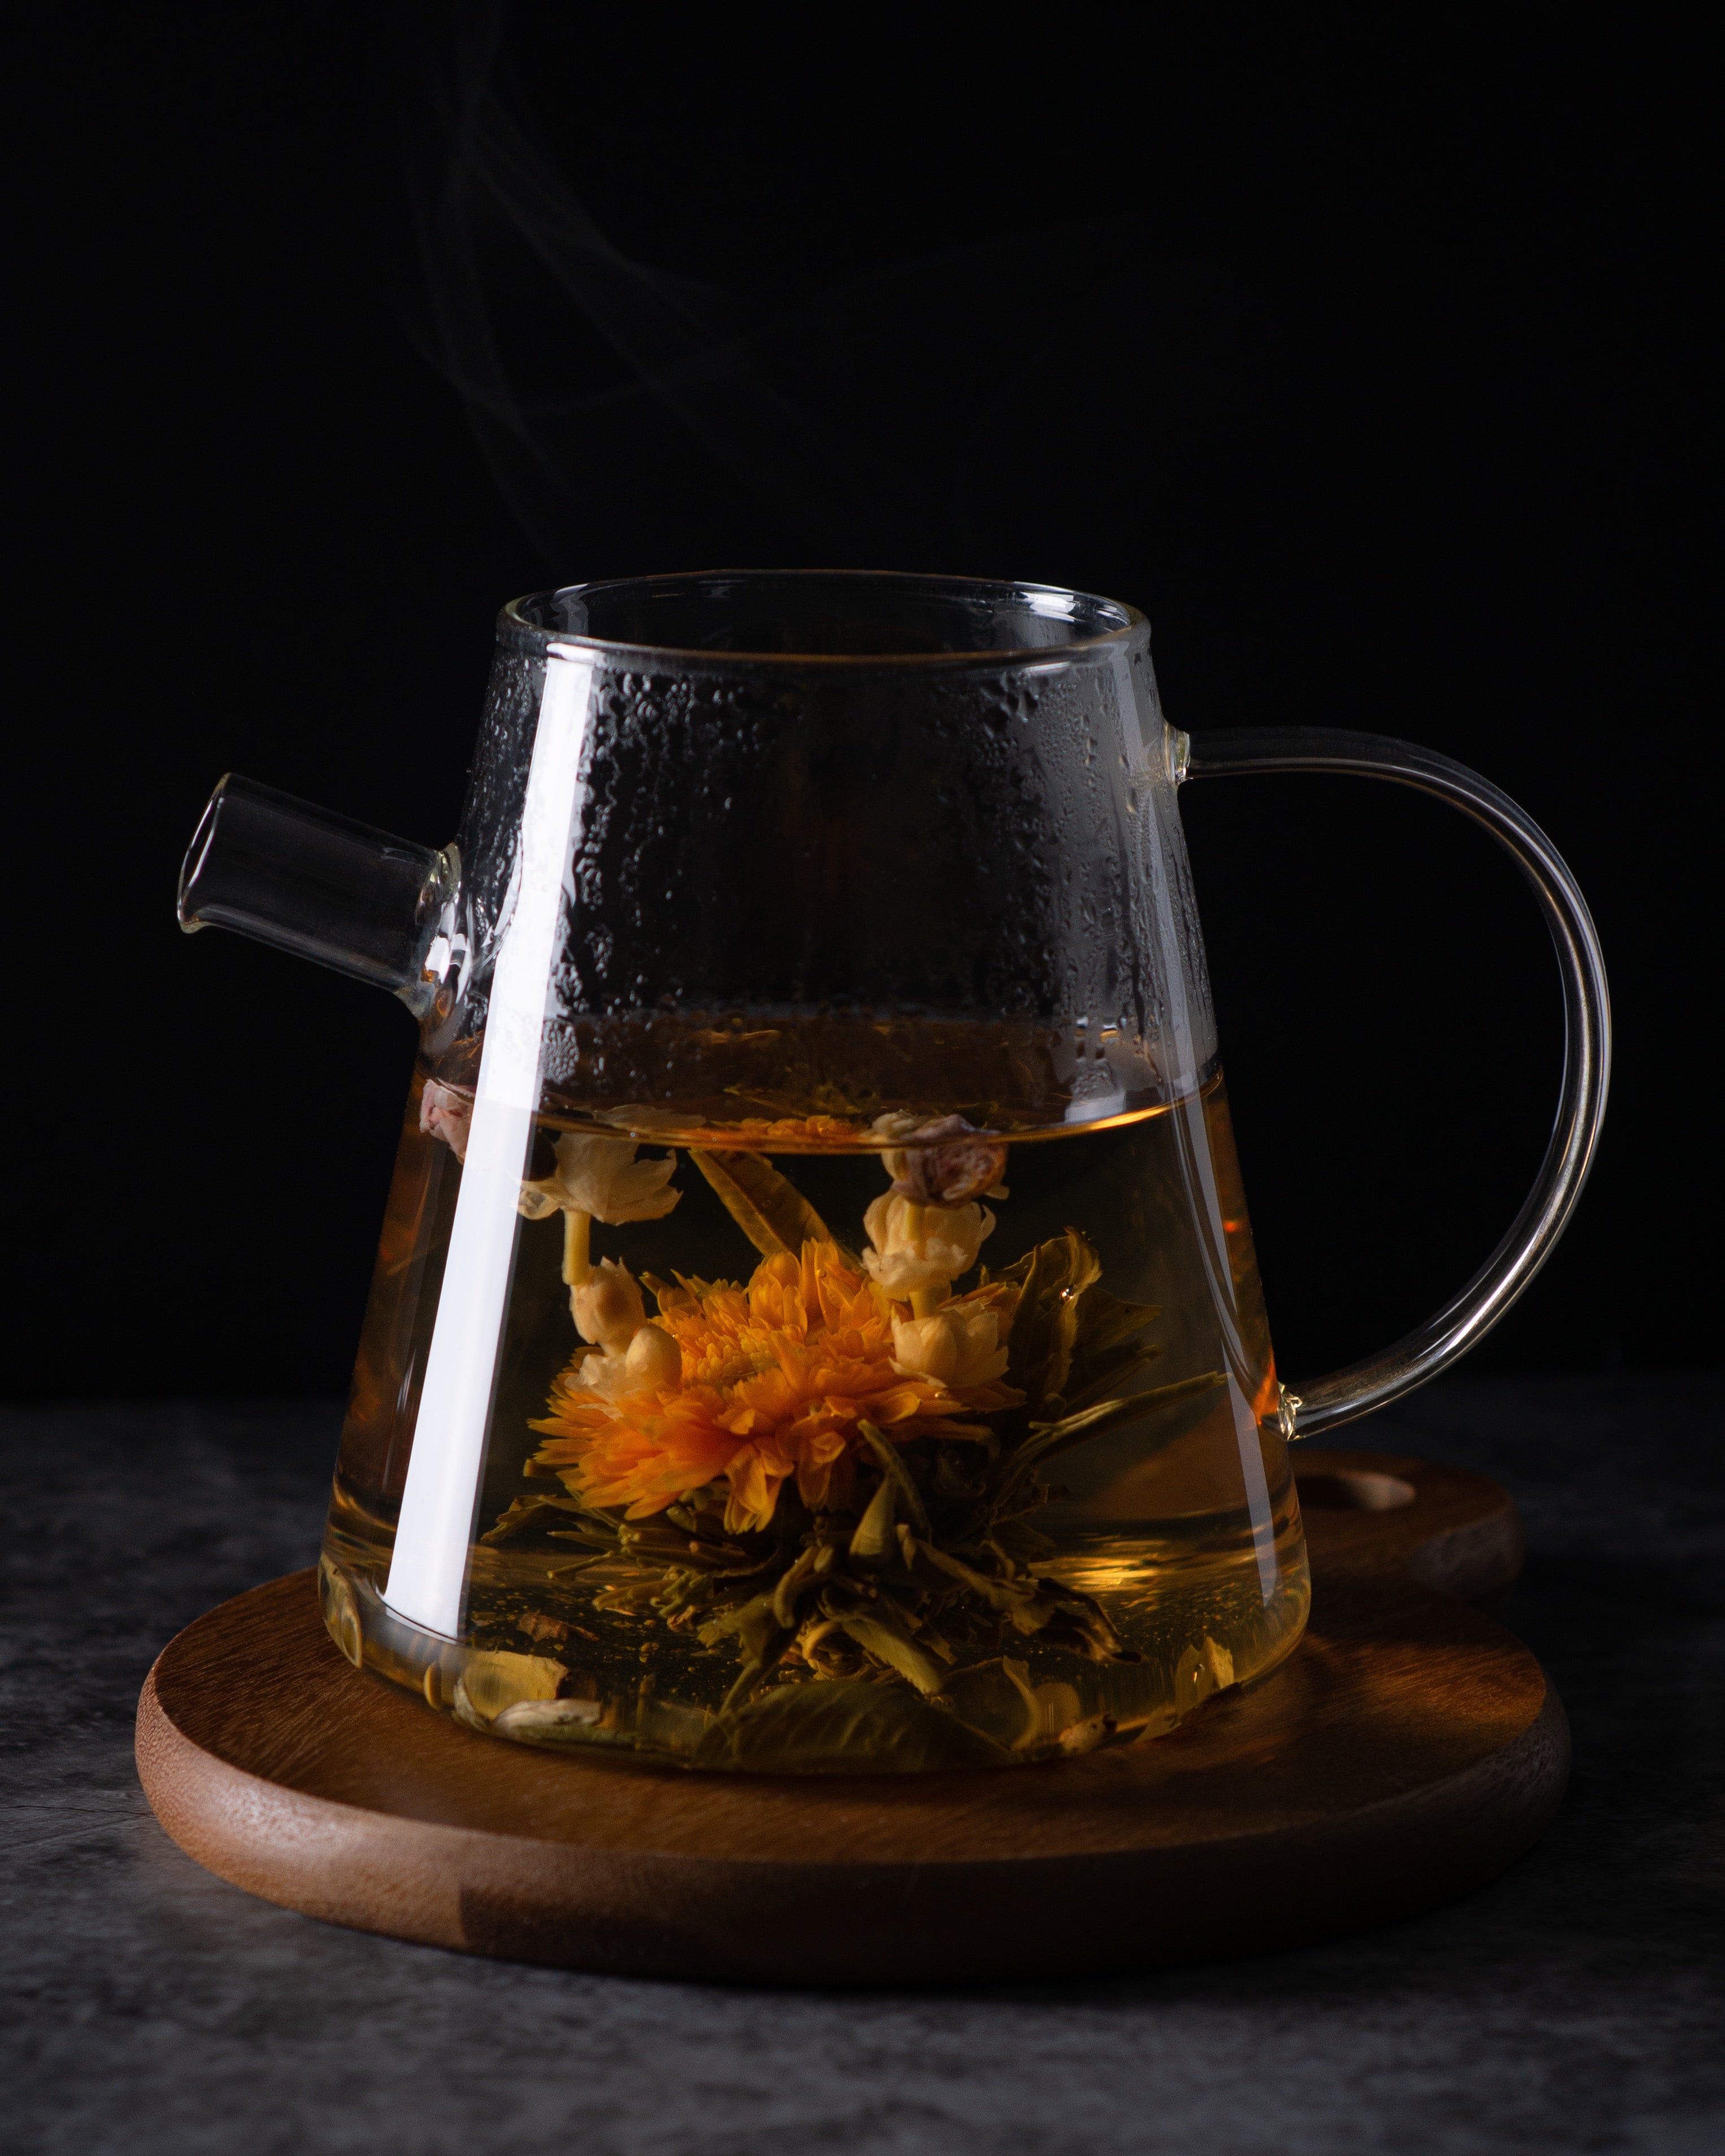 clear glass tea kettle with sunflower infused tea